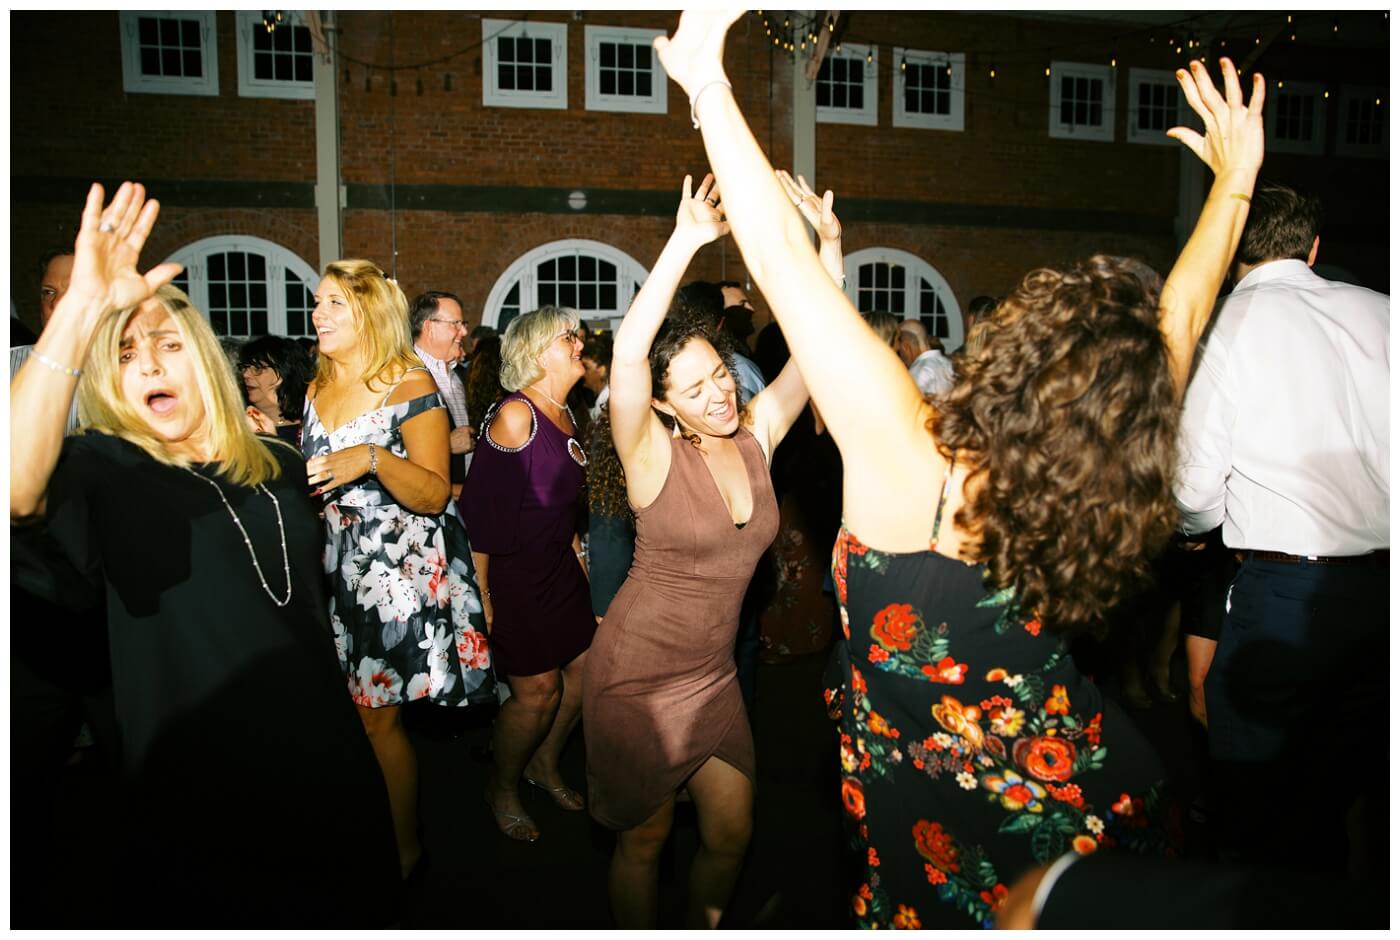 Wedding Reception at BRICK San Diego. Night photos of people dancing and wedding details